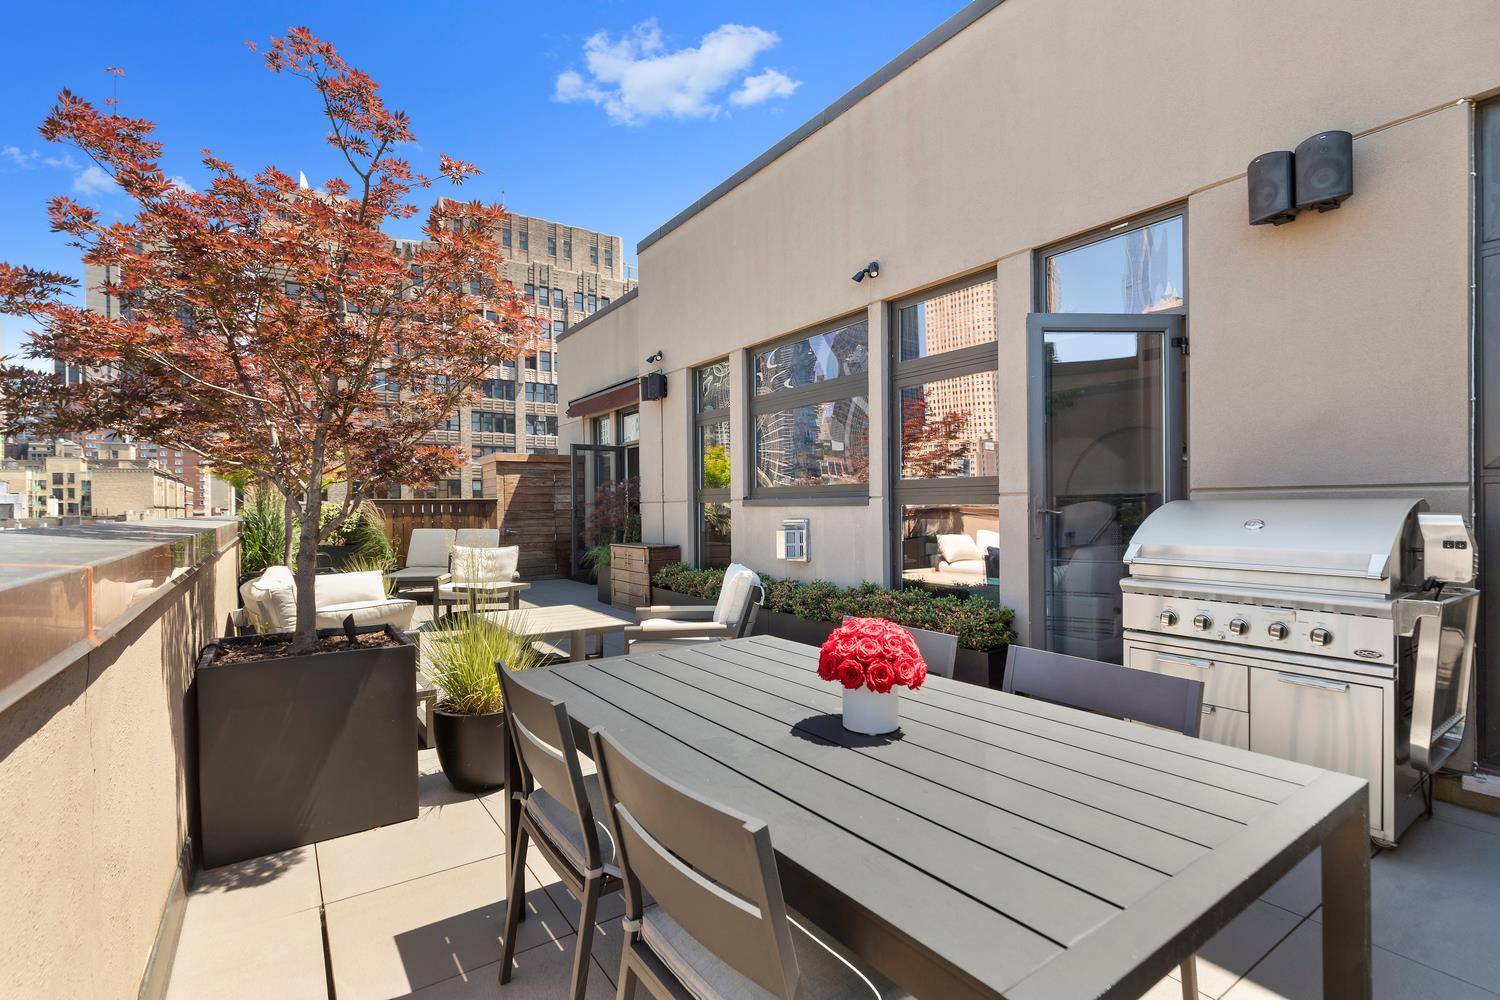 Available funfurnished. This unforgettable New York penthouse Condo apartment with dramatic 700sqft terrace has been superbly renovated to reflect luxurious 21st century design with wide plank dark oak flooring throughout ...